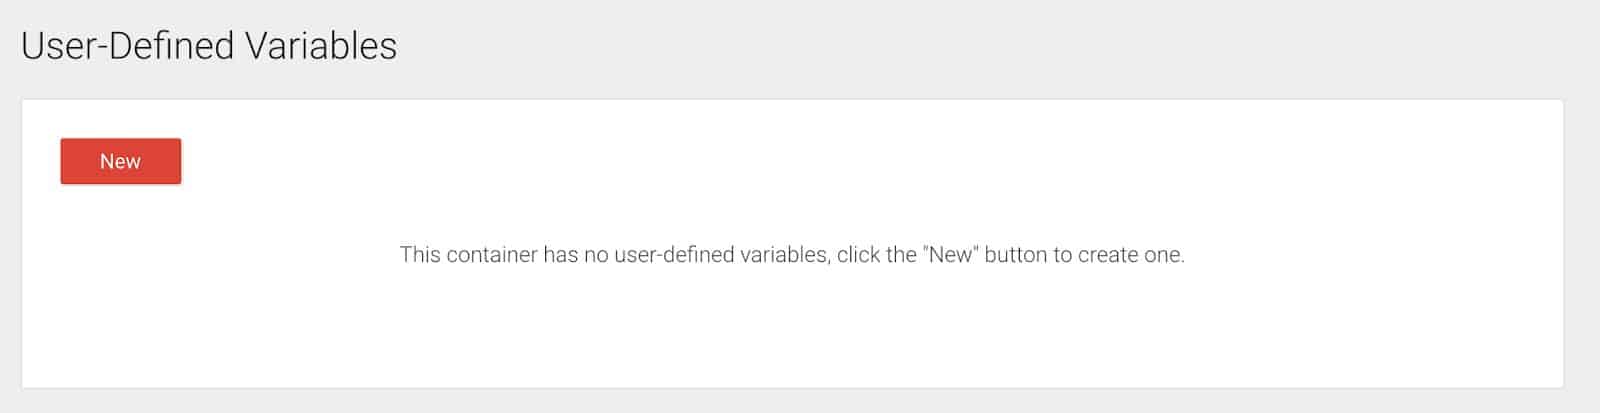 User-Defined Variables